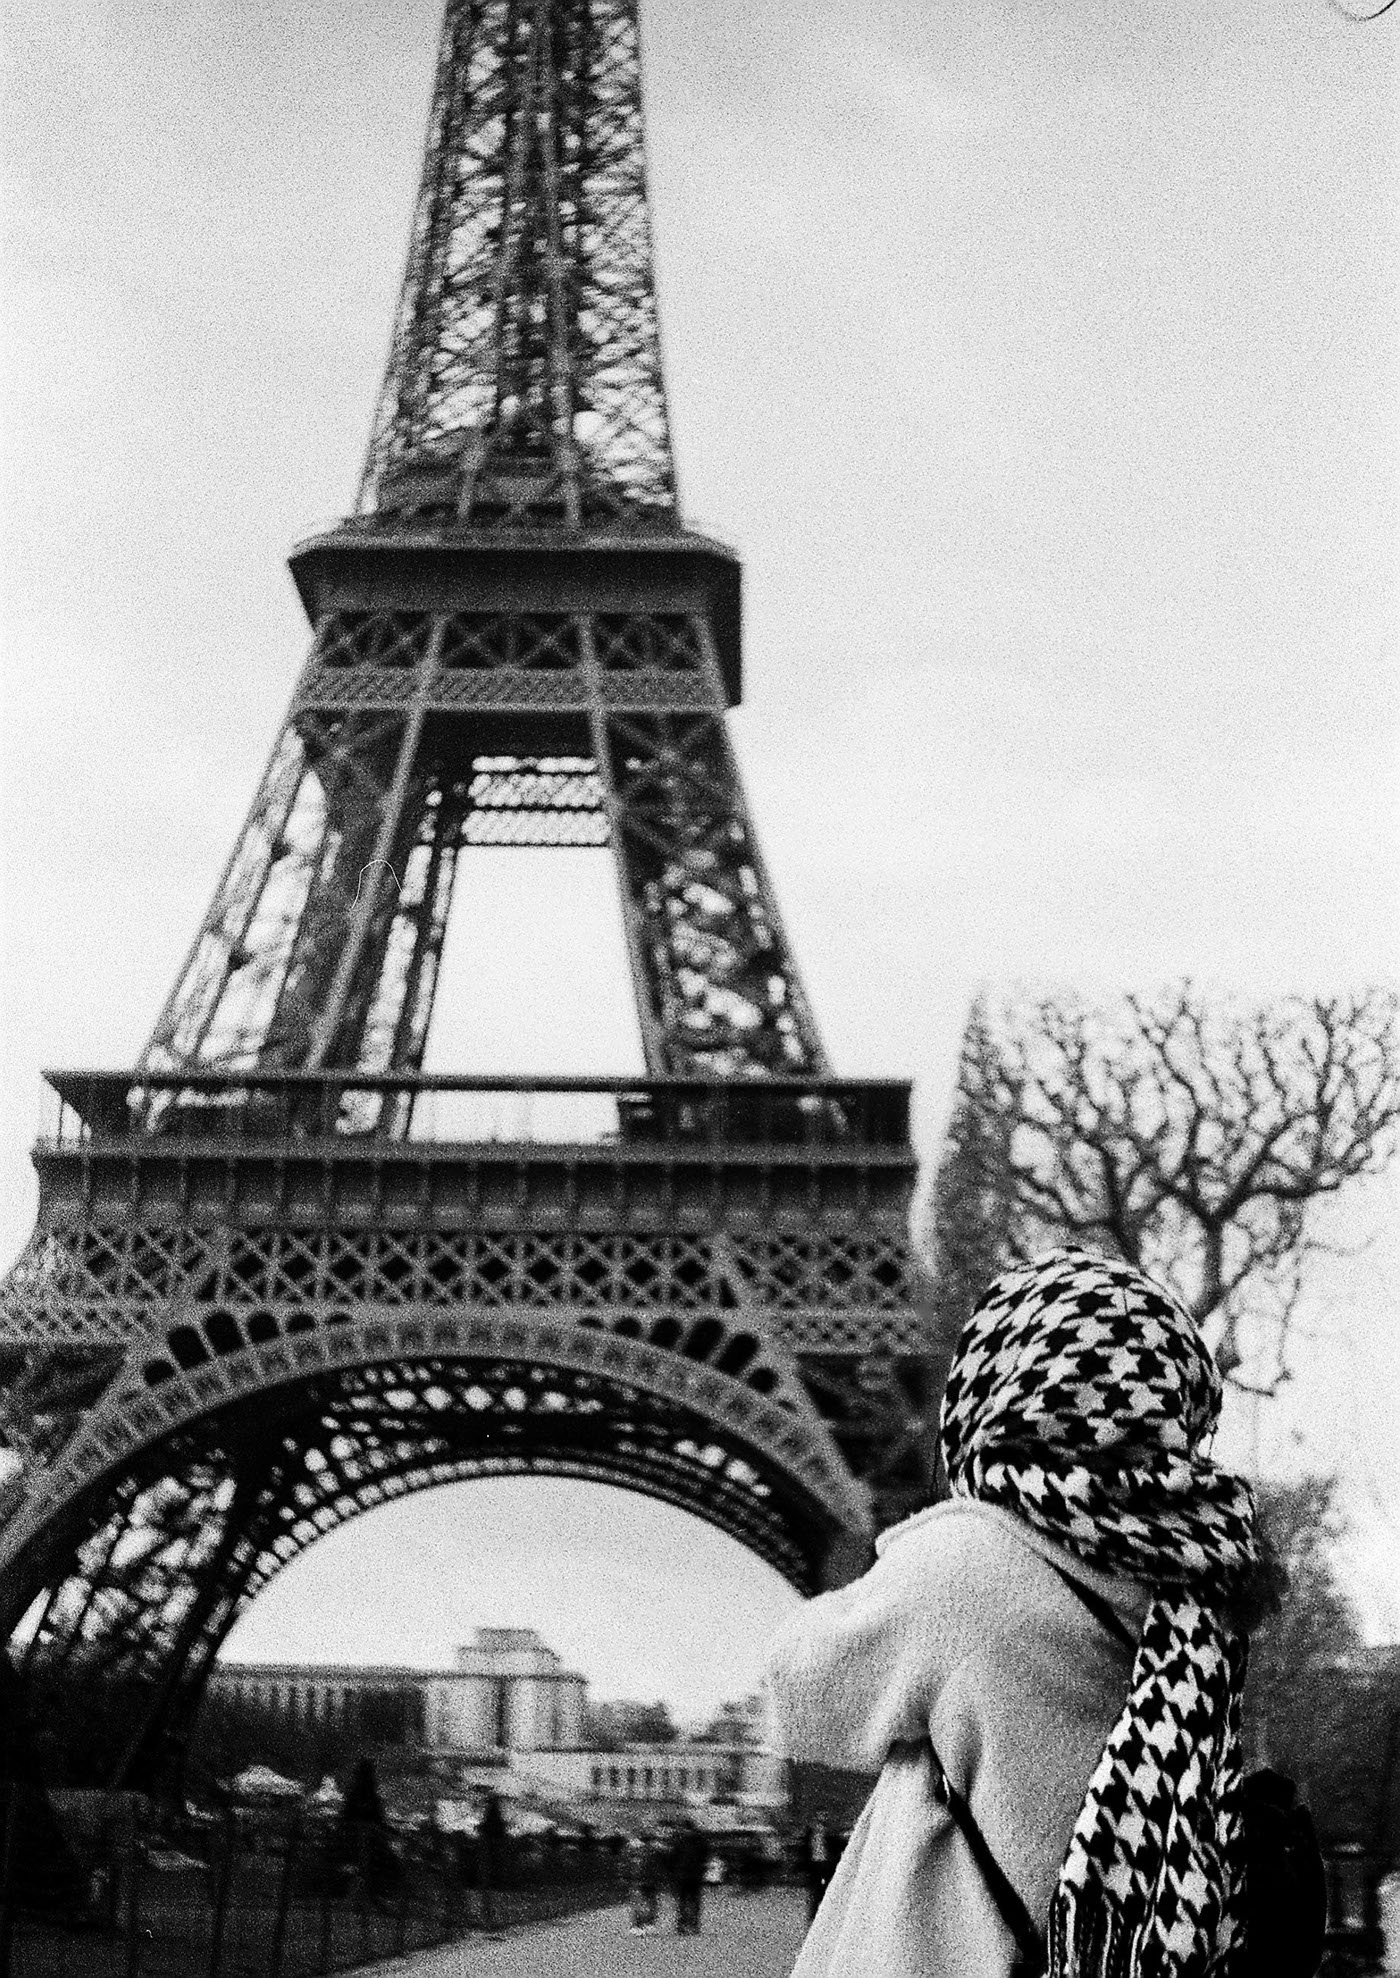 Paris la tour eiffel france analogue photography black and white Chinon eiffel tower notre dame Photography with film